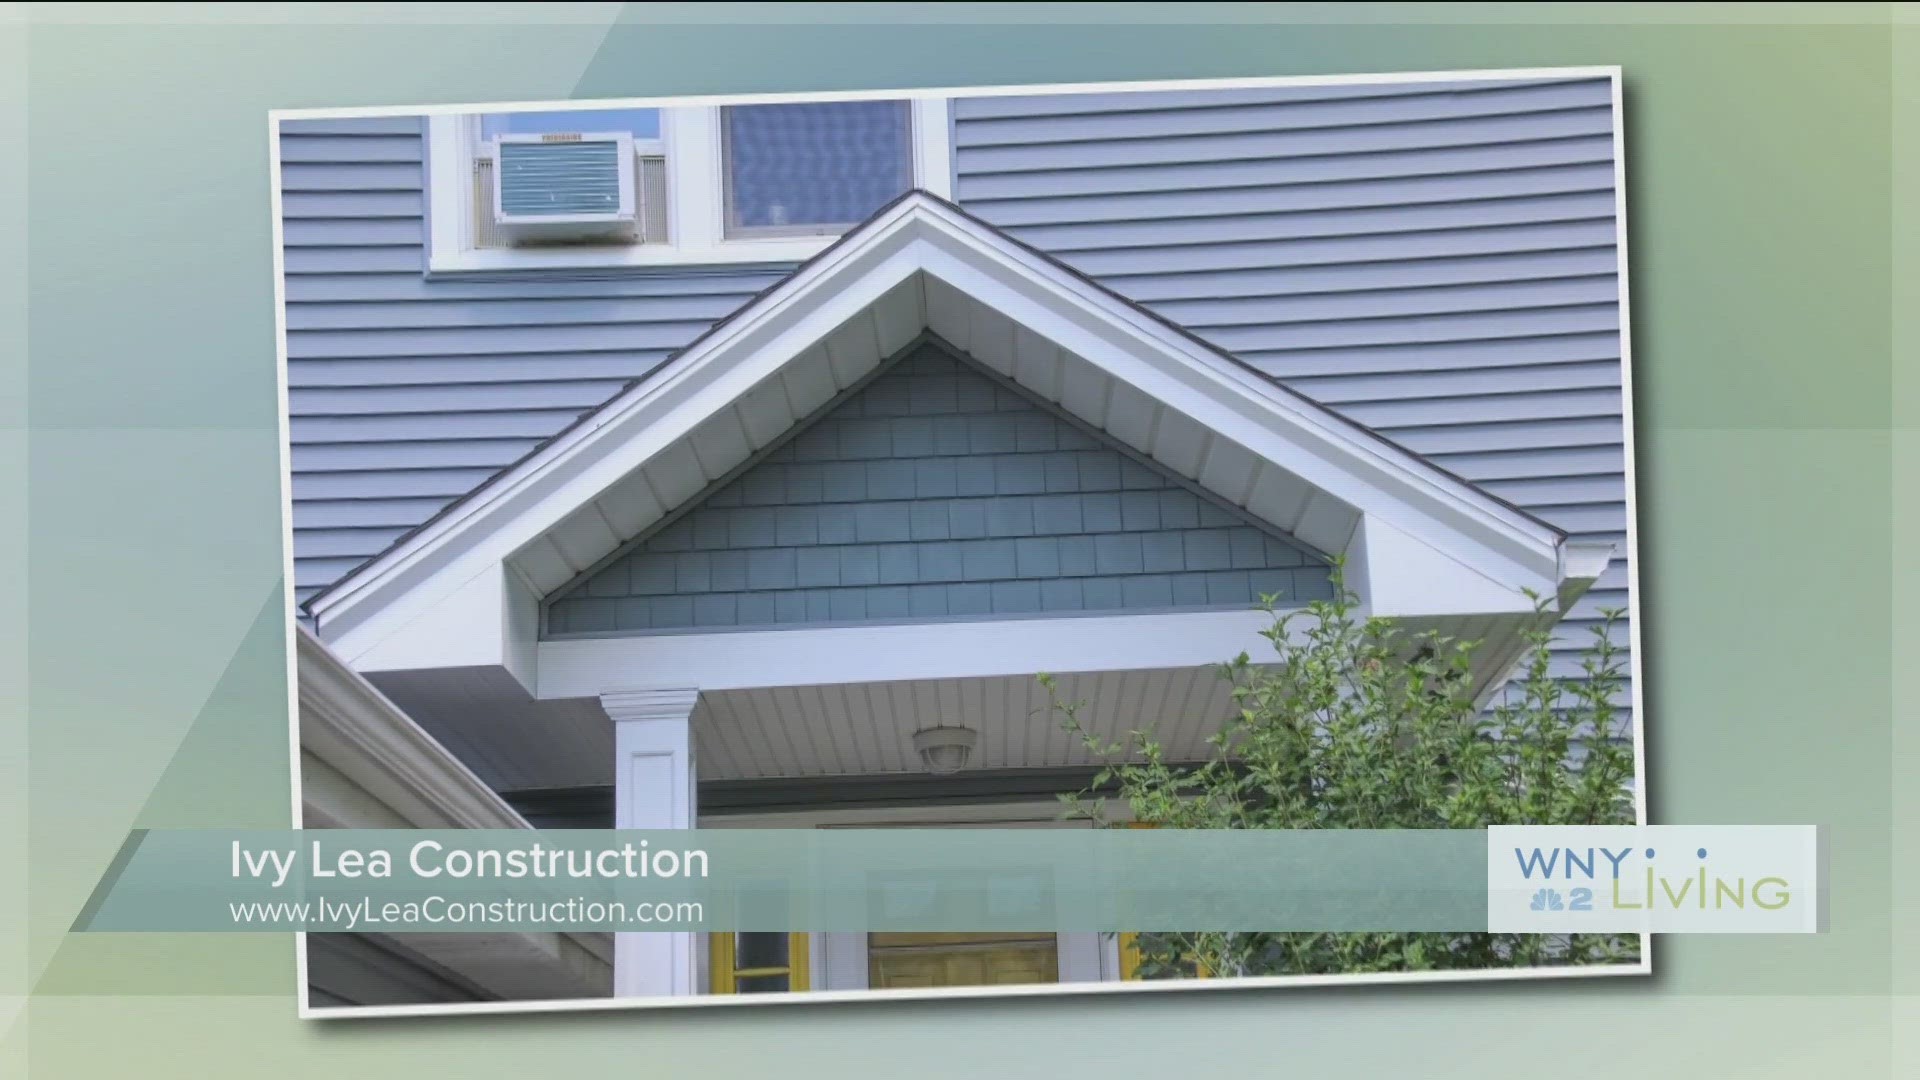 Sept. 16t- Ivy Lea Construction -(THIS VIDEO IS SPONSORED BY IVY LEA CONSTRUCTION)